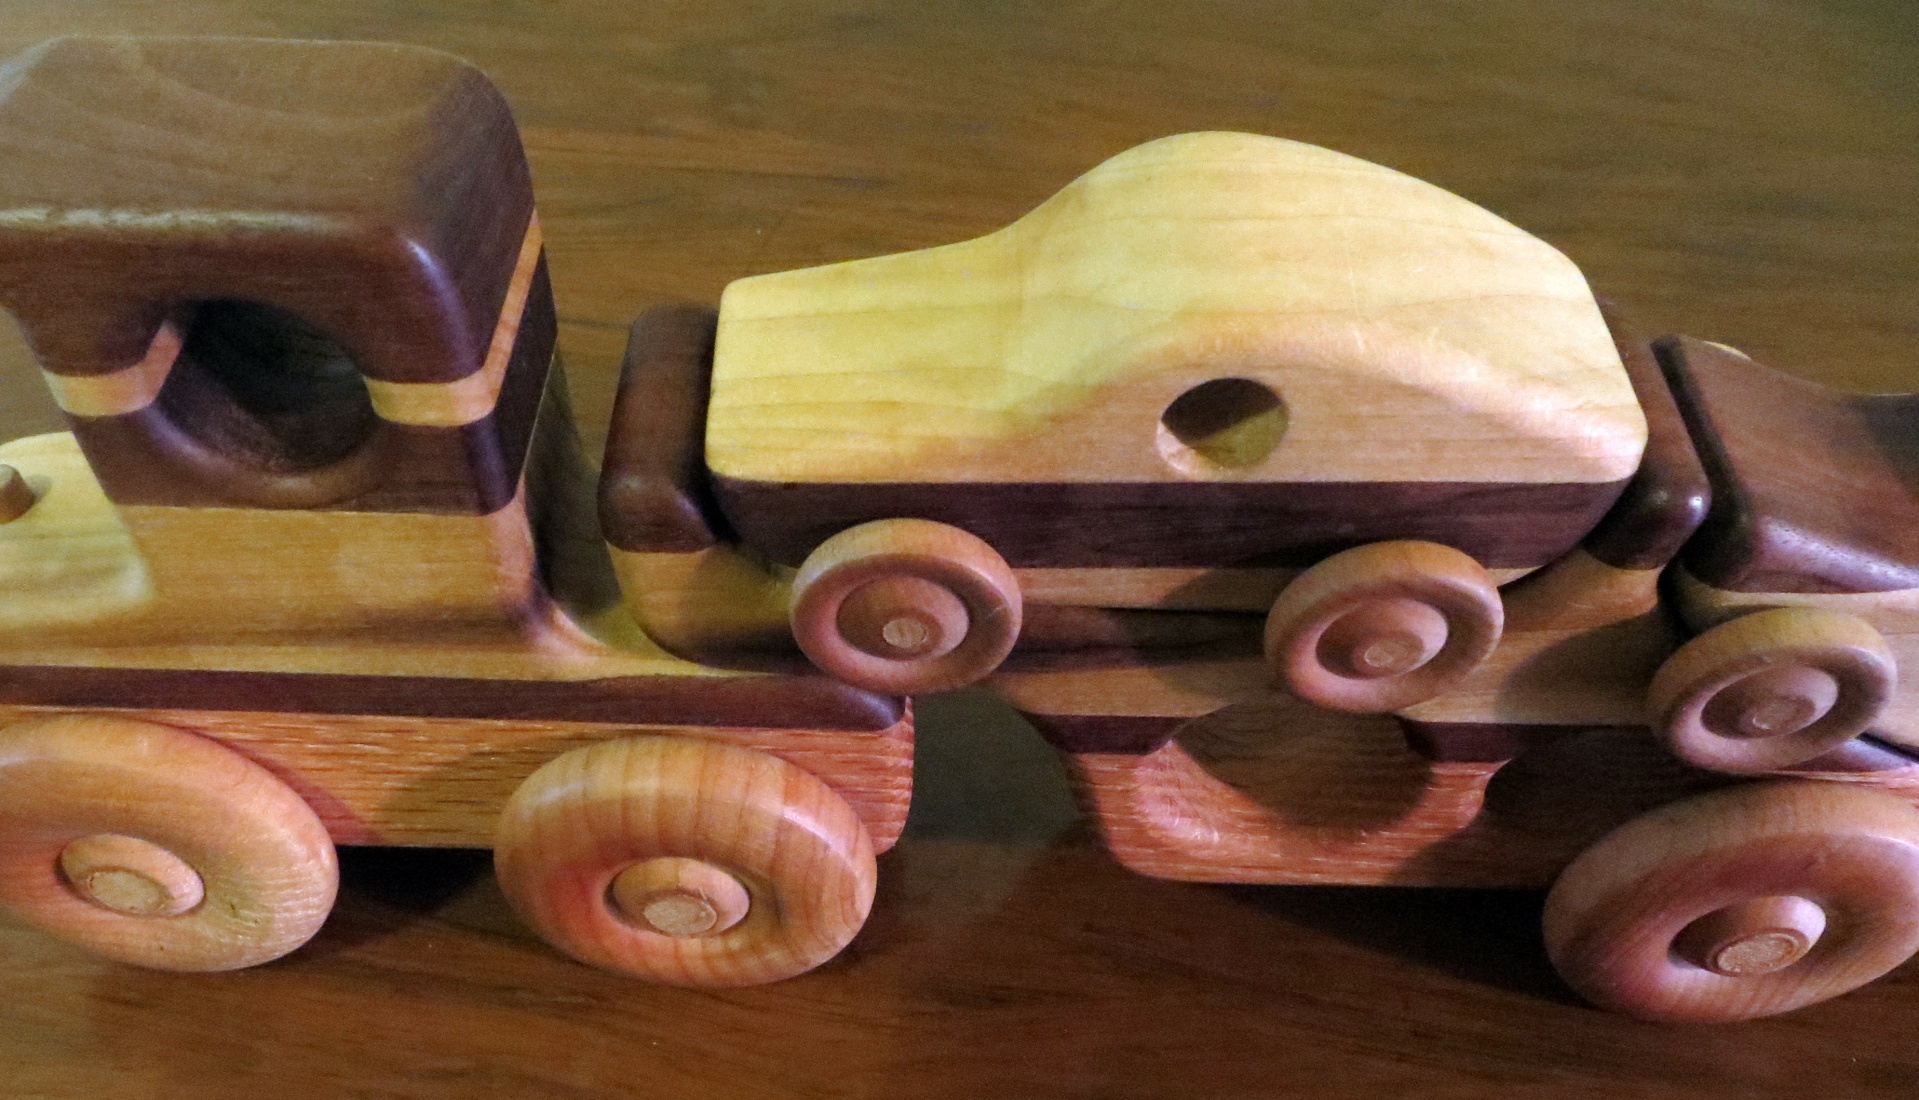 A handmade vintage wooden toy cars truck set carved in Ohio